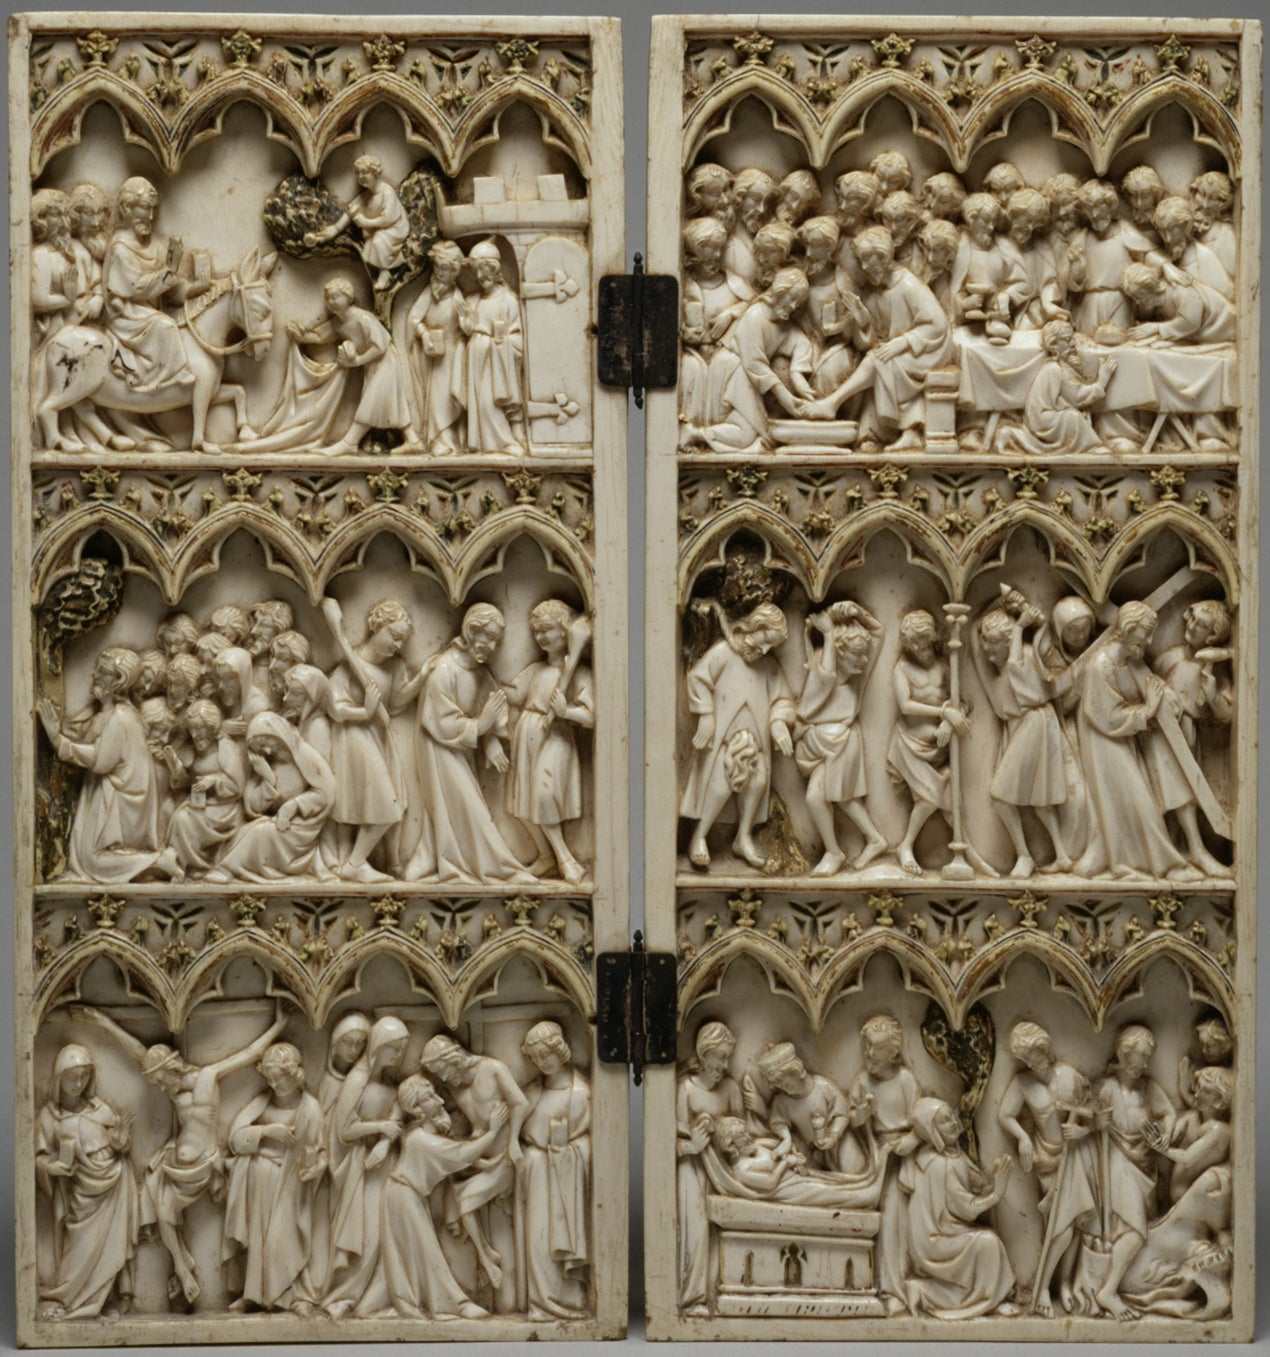 This 14th century French artwork, now in the Walters Art Museum in Baltimore, gives some idea of what the complete 12th century masterpiece might have looked like